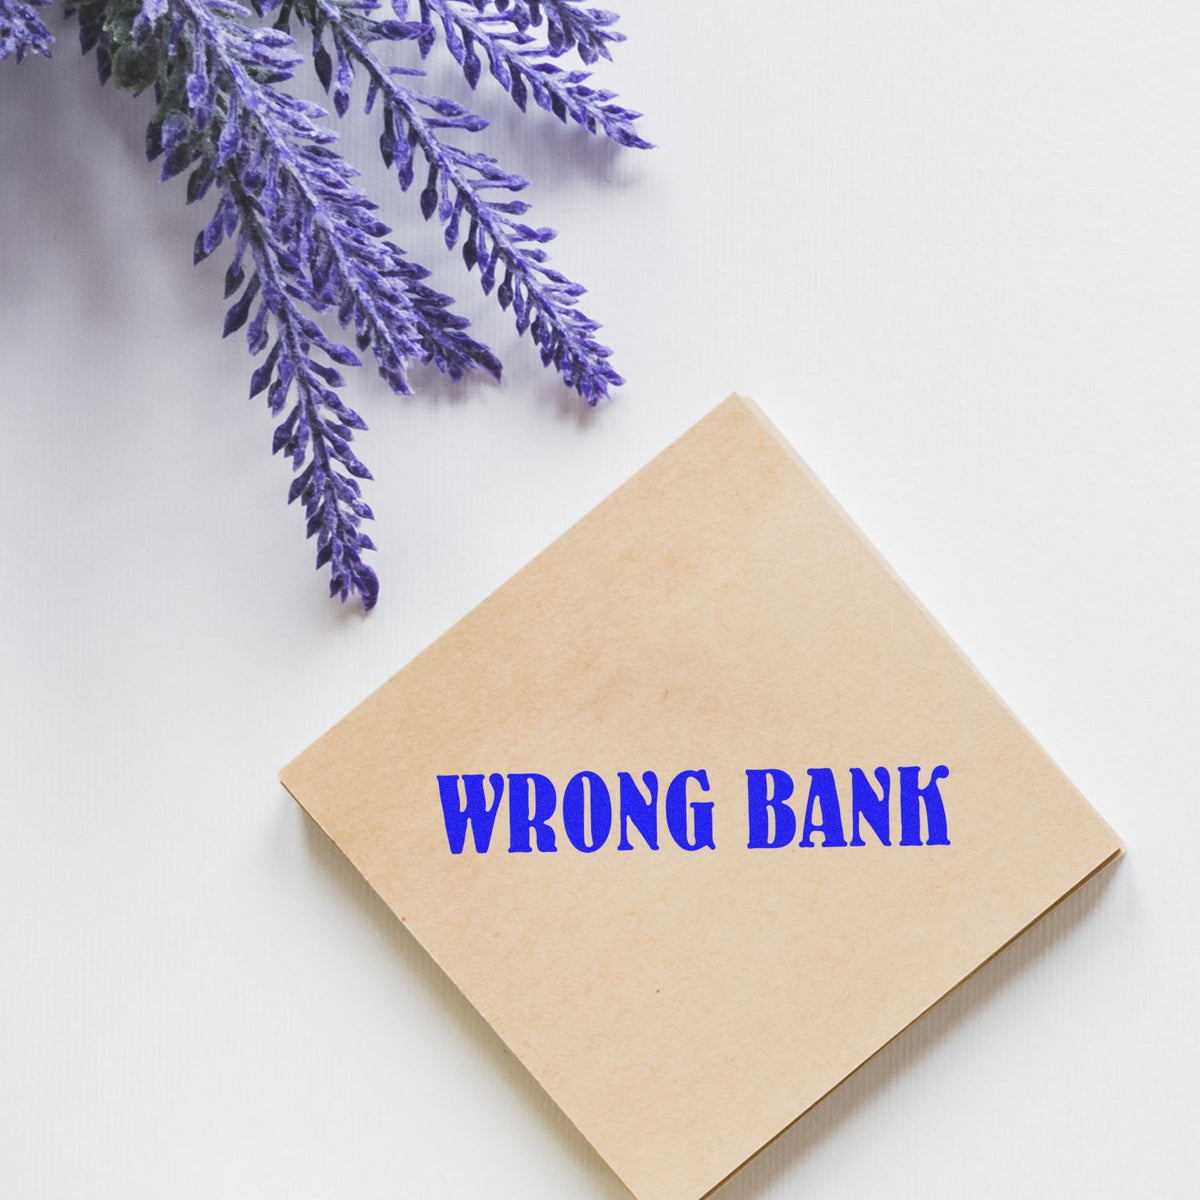 Wrong Bank Rubber Stamp In Use Photo